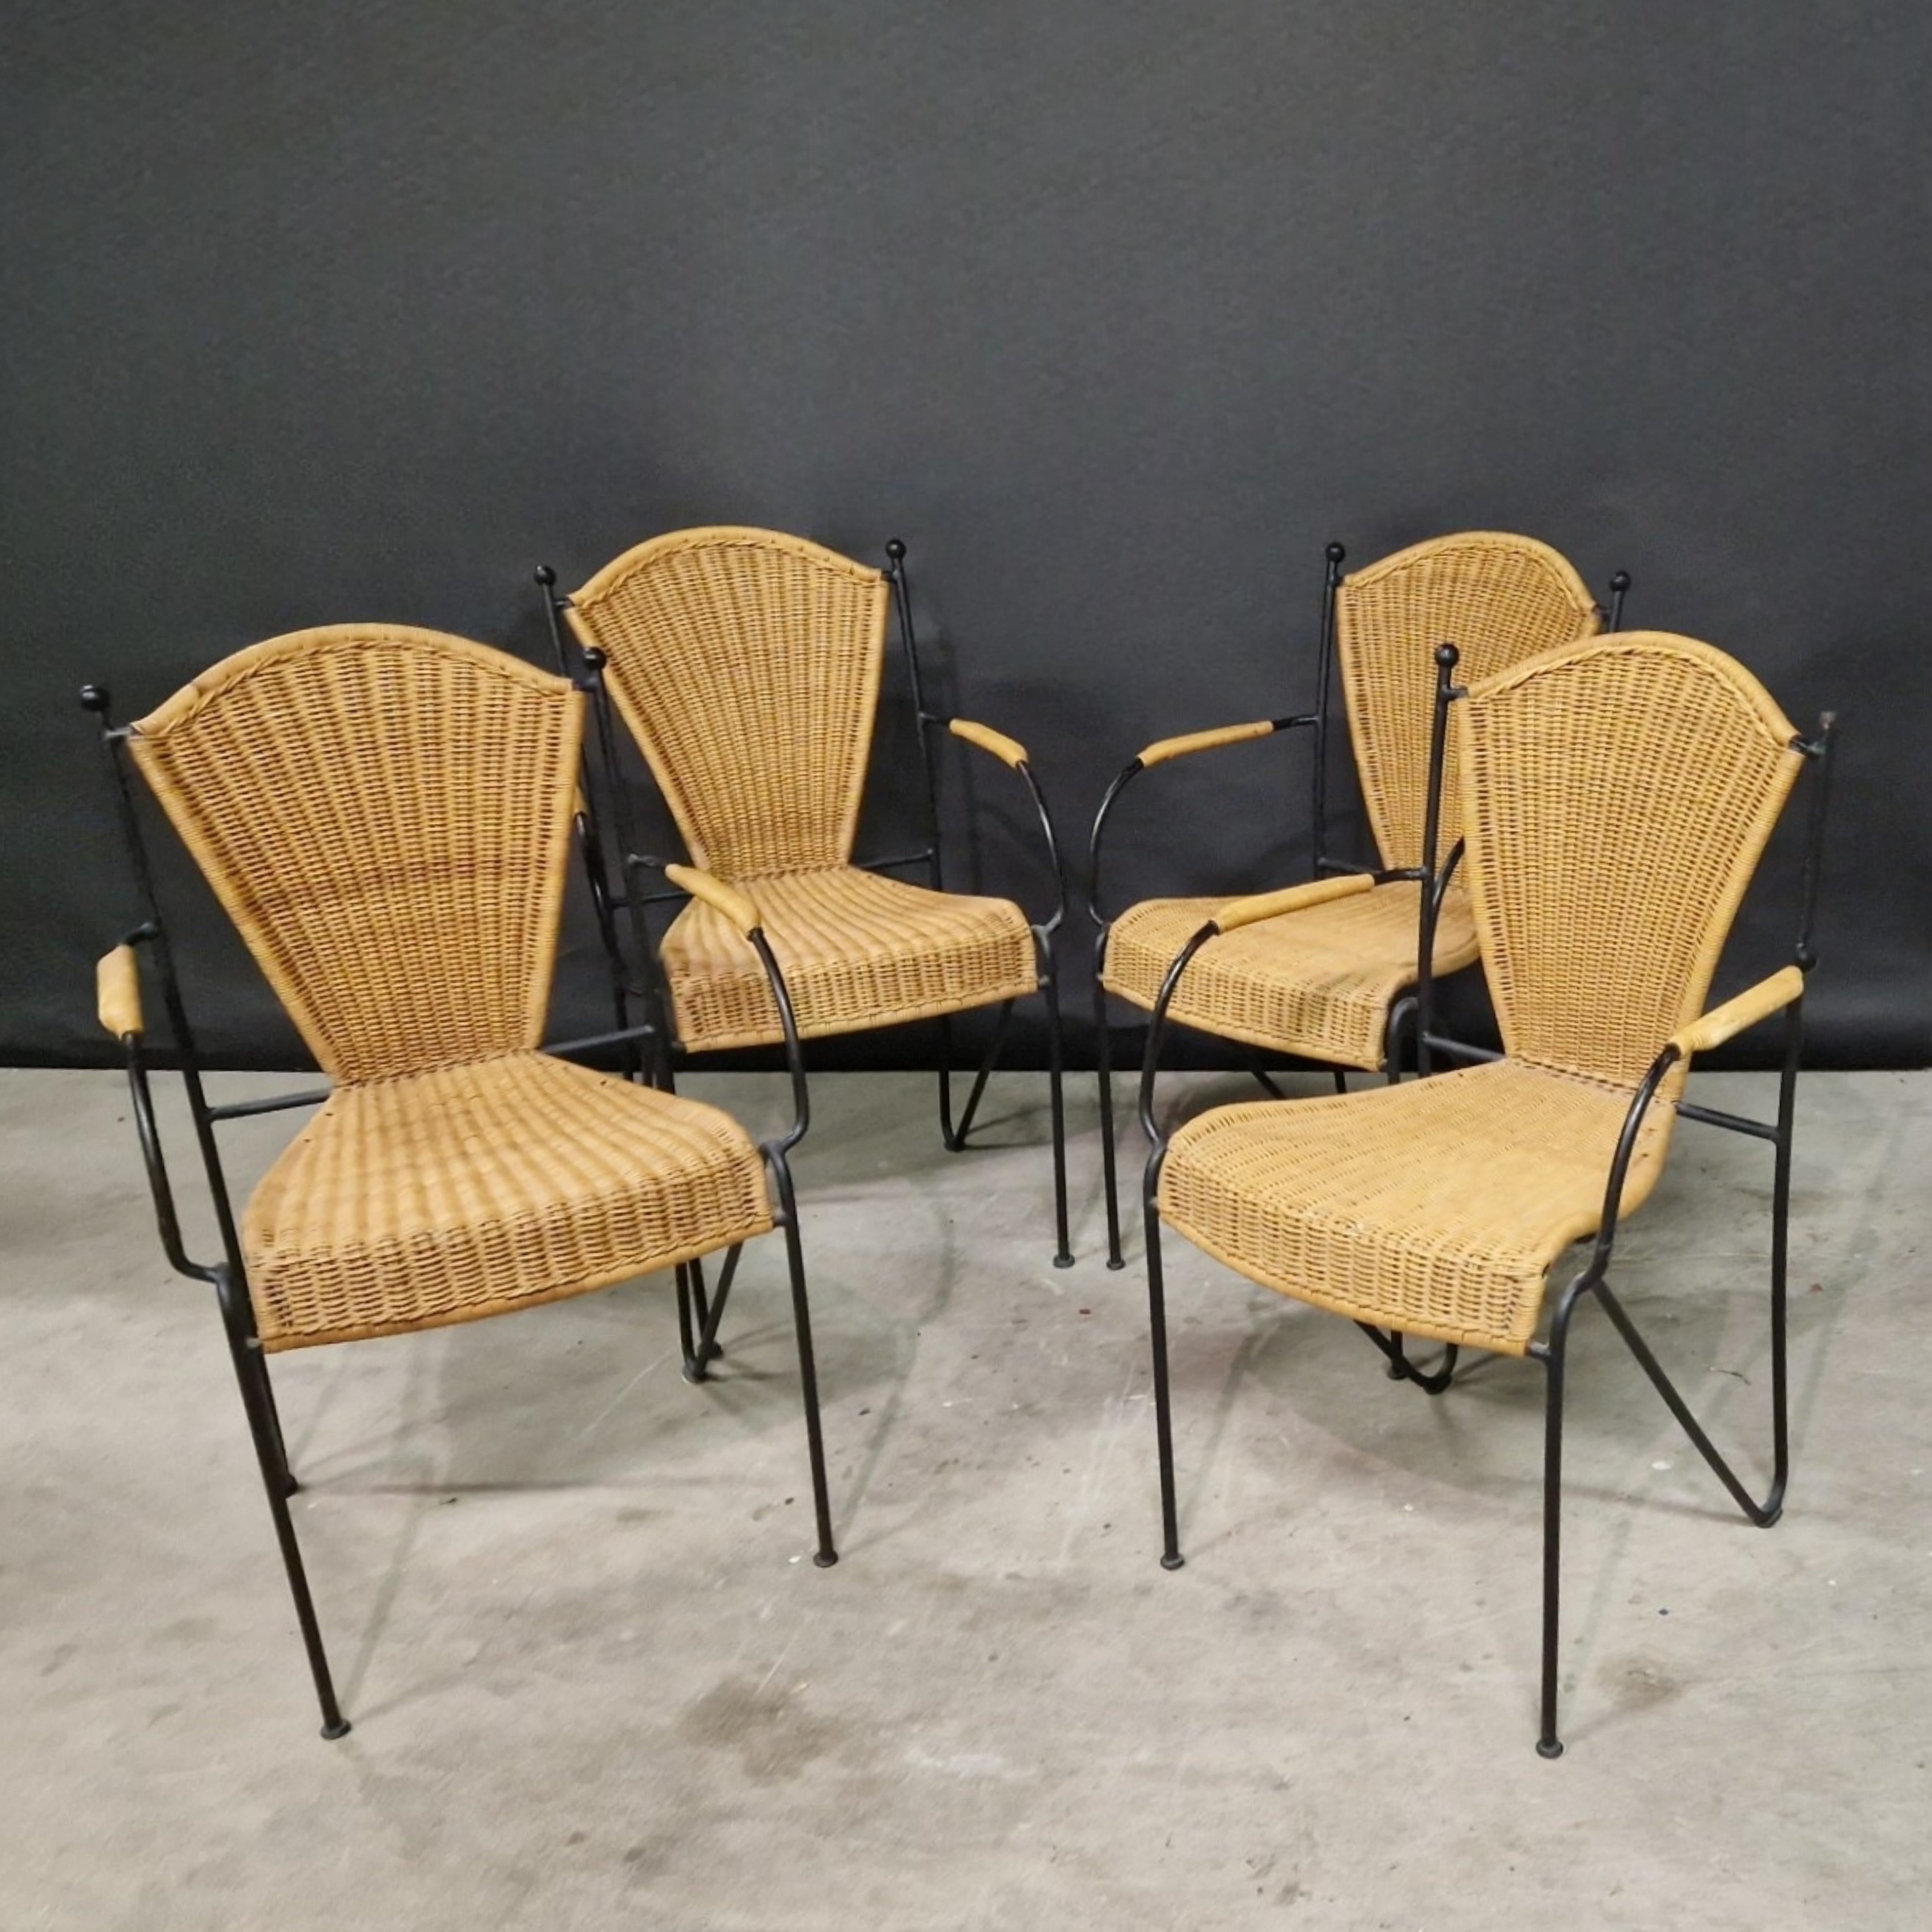 Set of 8 French dining chairs. The frames are made from solid wrought iron and the seats are made from wicker. Handcrafted in the 1960s and still in an amazing condition, Heavy quality made pieces. Stackable.  These can be used outside as well as